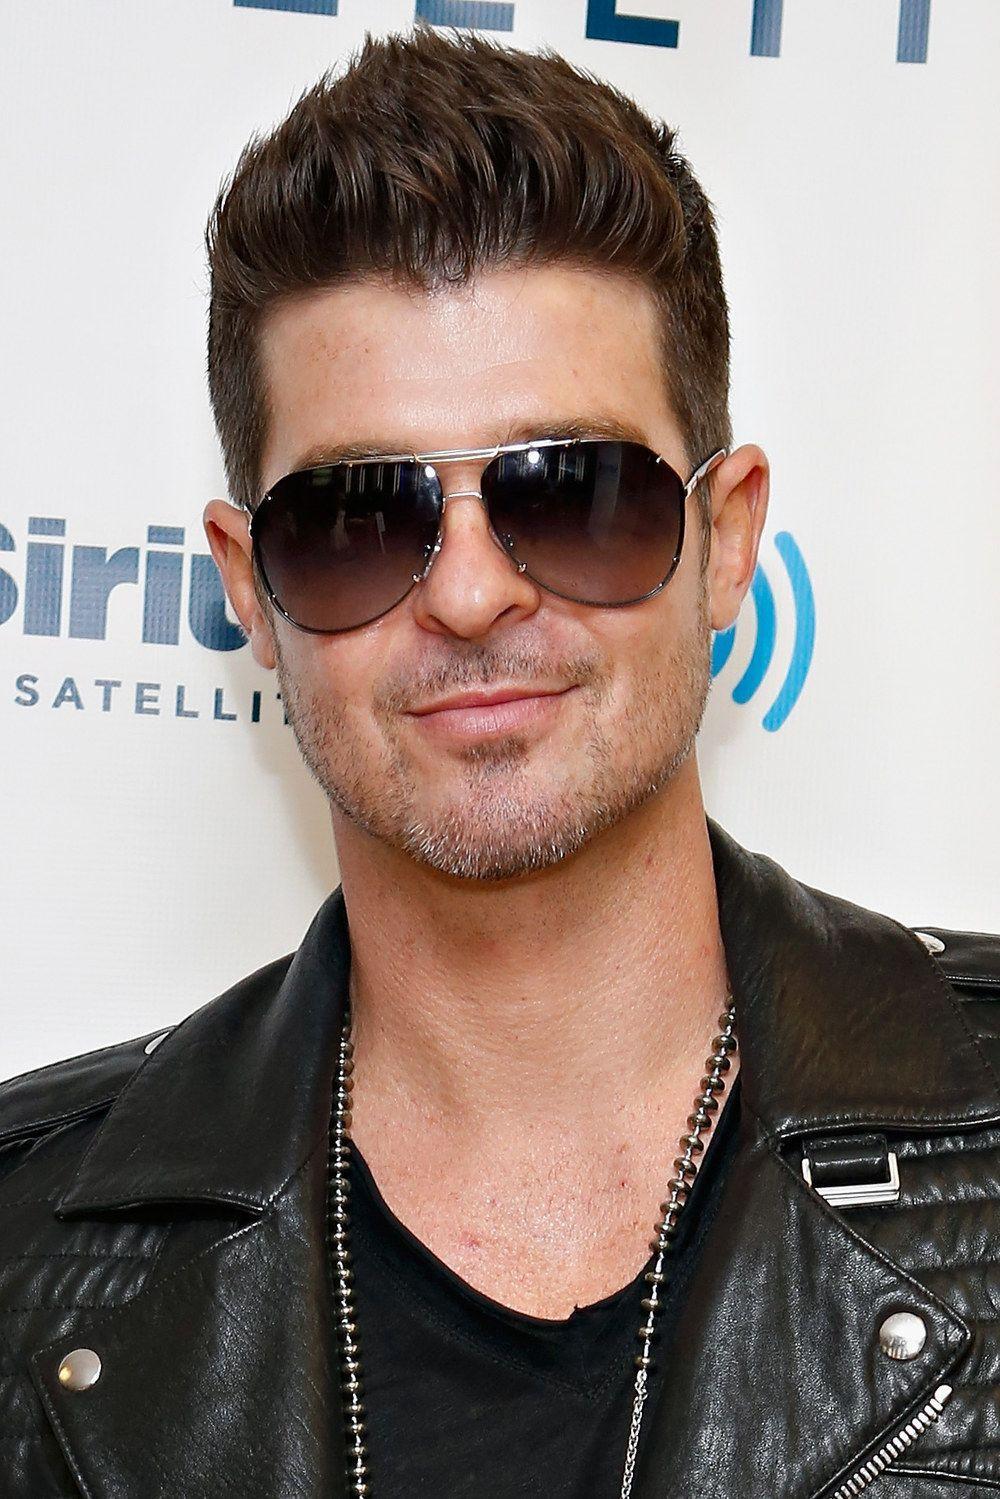 HD Robin Thicke Wallpaper and Photo. HD Celebrities Wallpaper